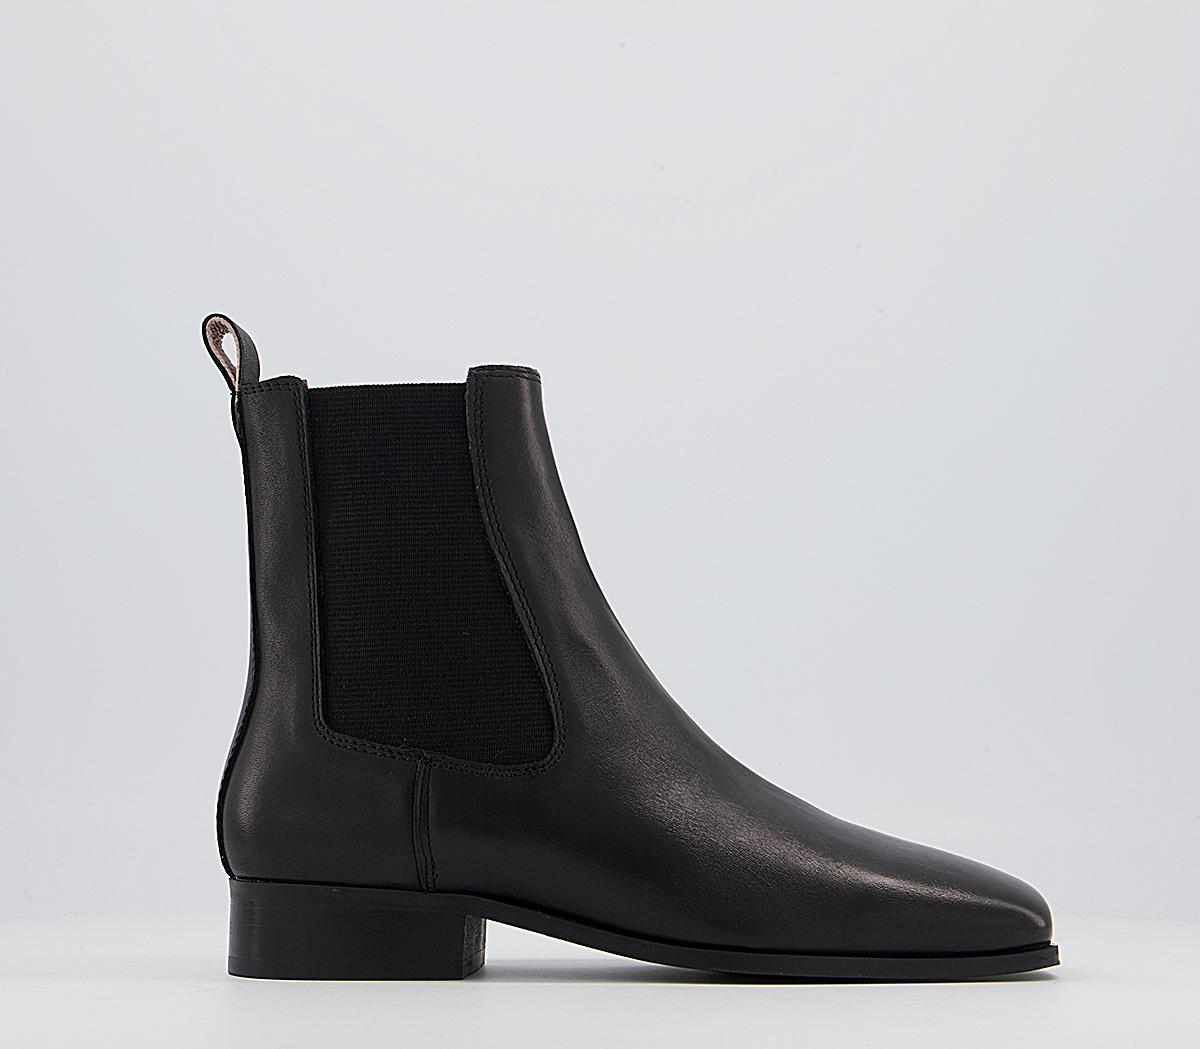 Office Angelina Square Toe Formal Chelsea Boots Black Leather - Ankle Boots